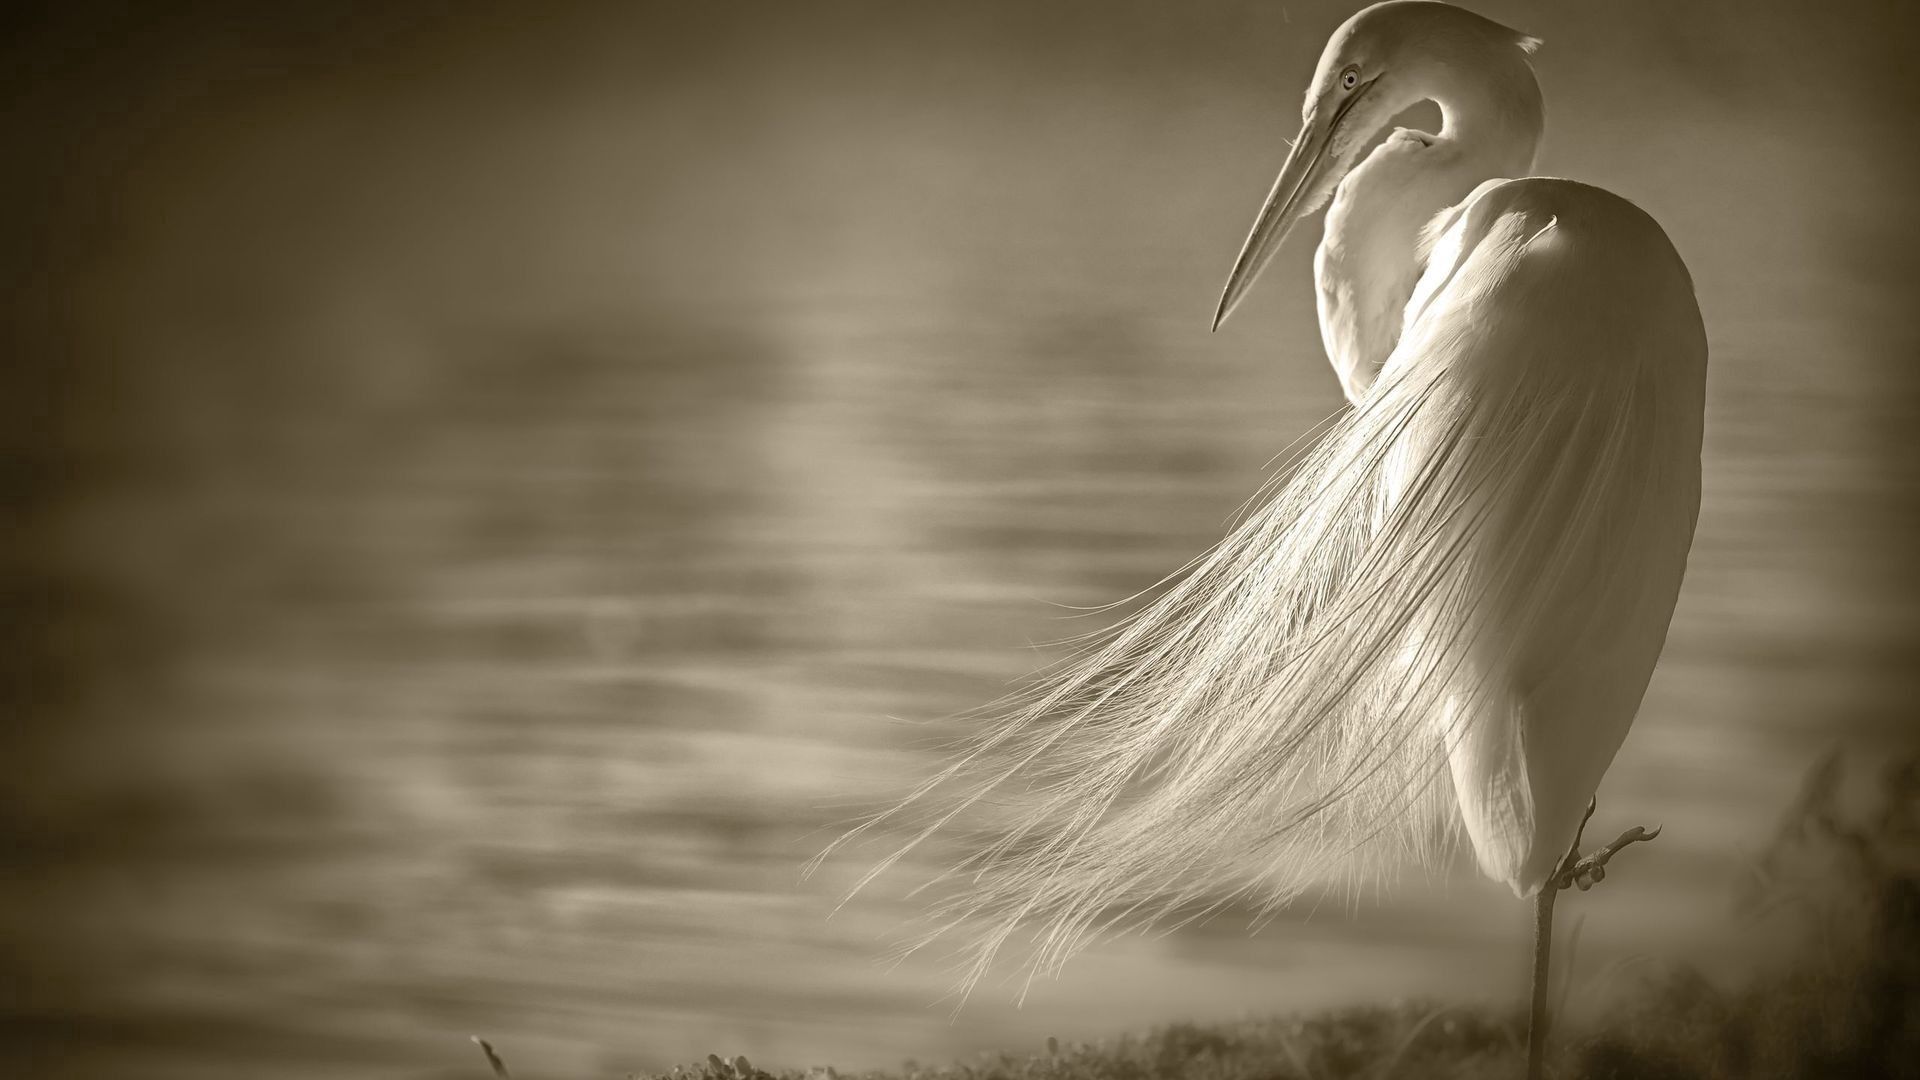 Download wallpaper 1920x1080 heron, bird, loneliness, swamps, black white full hd, hdtv, fhd, 1080p HD background